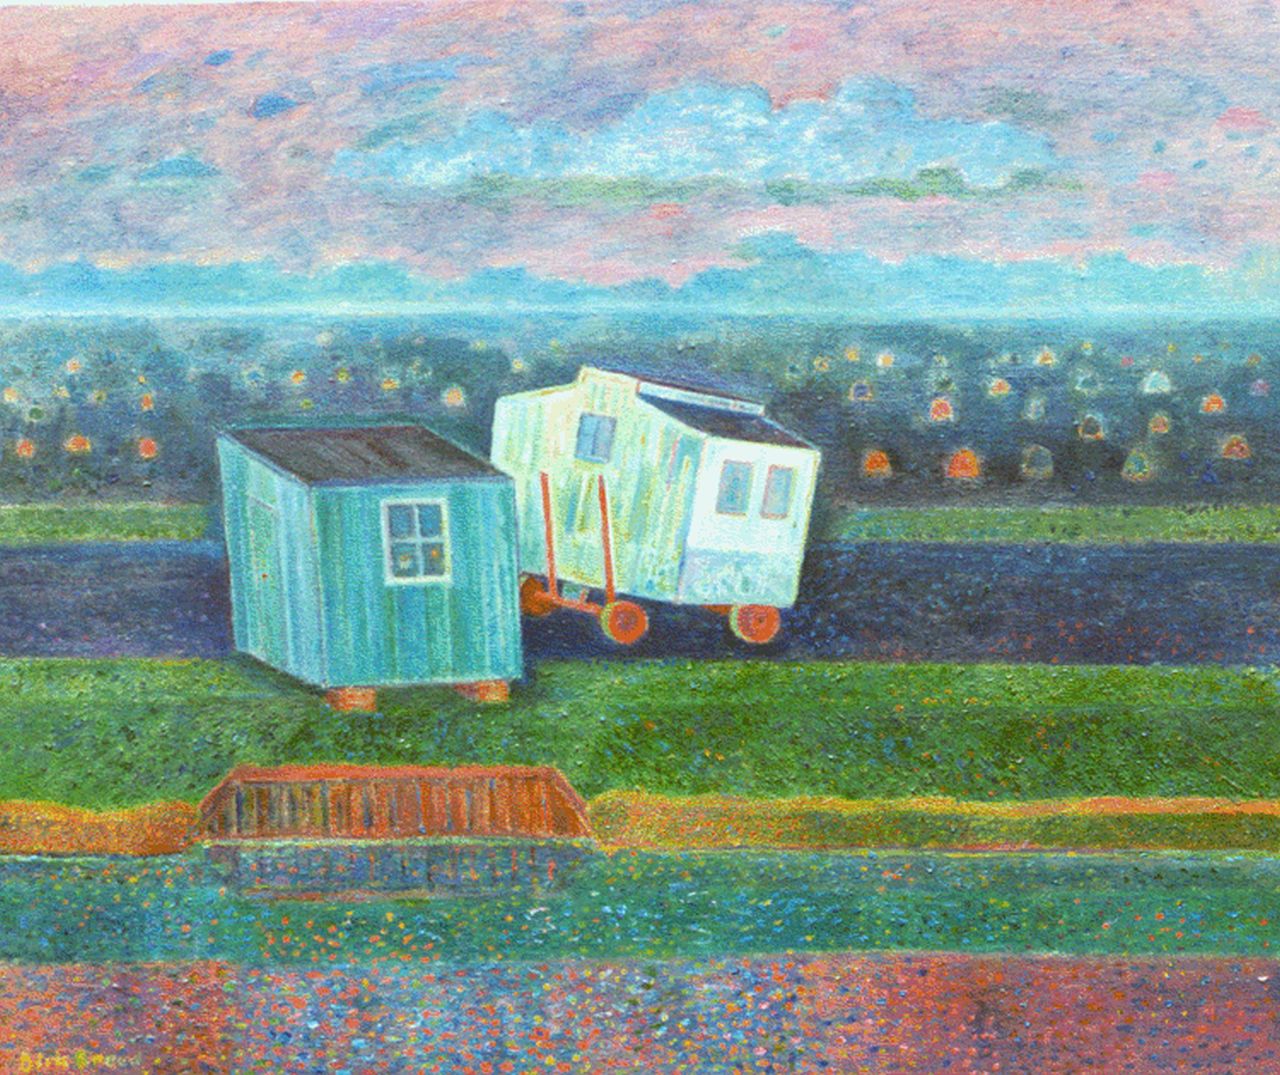 Breed D.C.  | 'Dirk' Cornelis Breed, Caravans in a landscape, Öl auf Leinwand 50,2 x 59,9 cm, signed l.l. and on the reverse